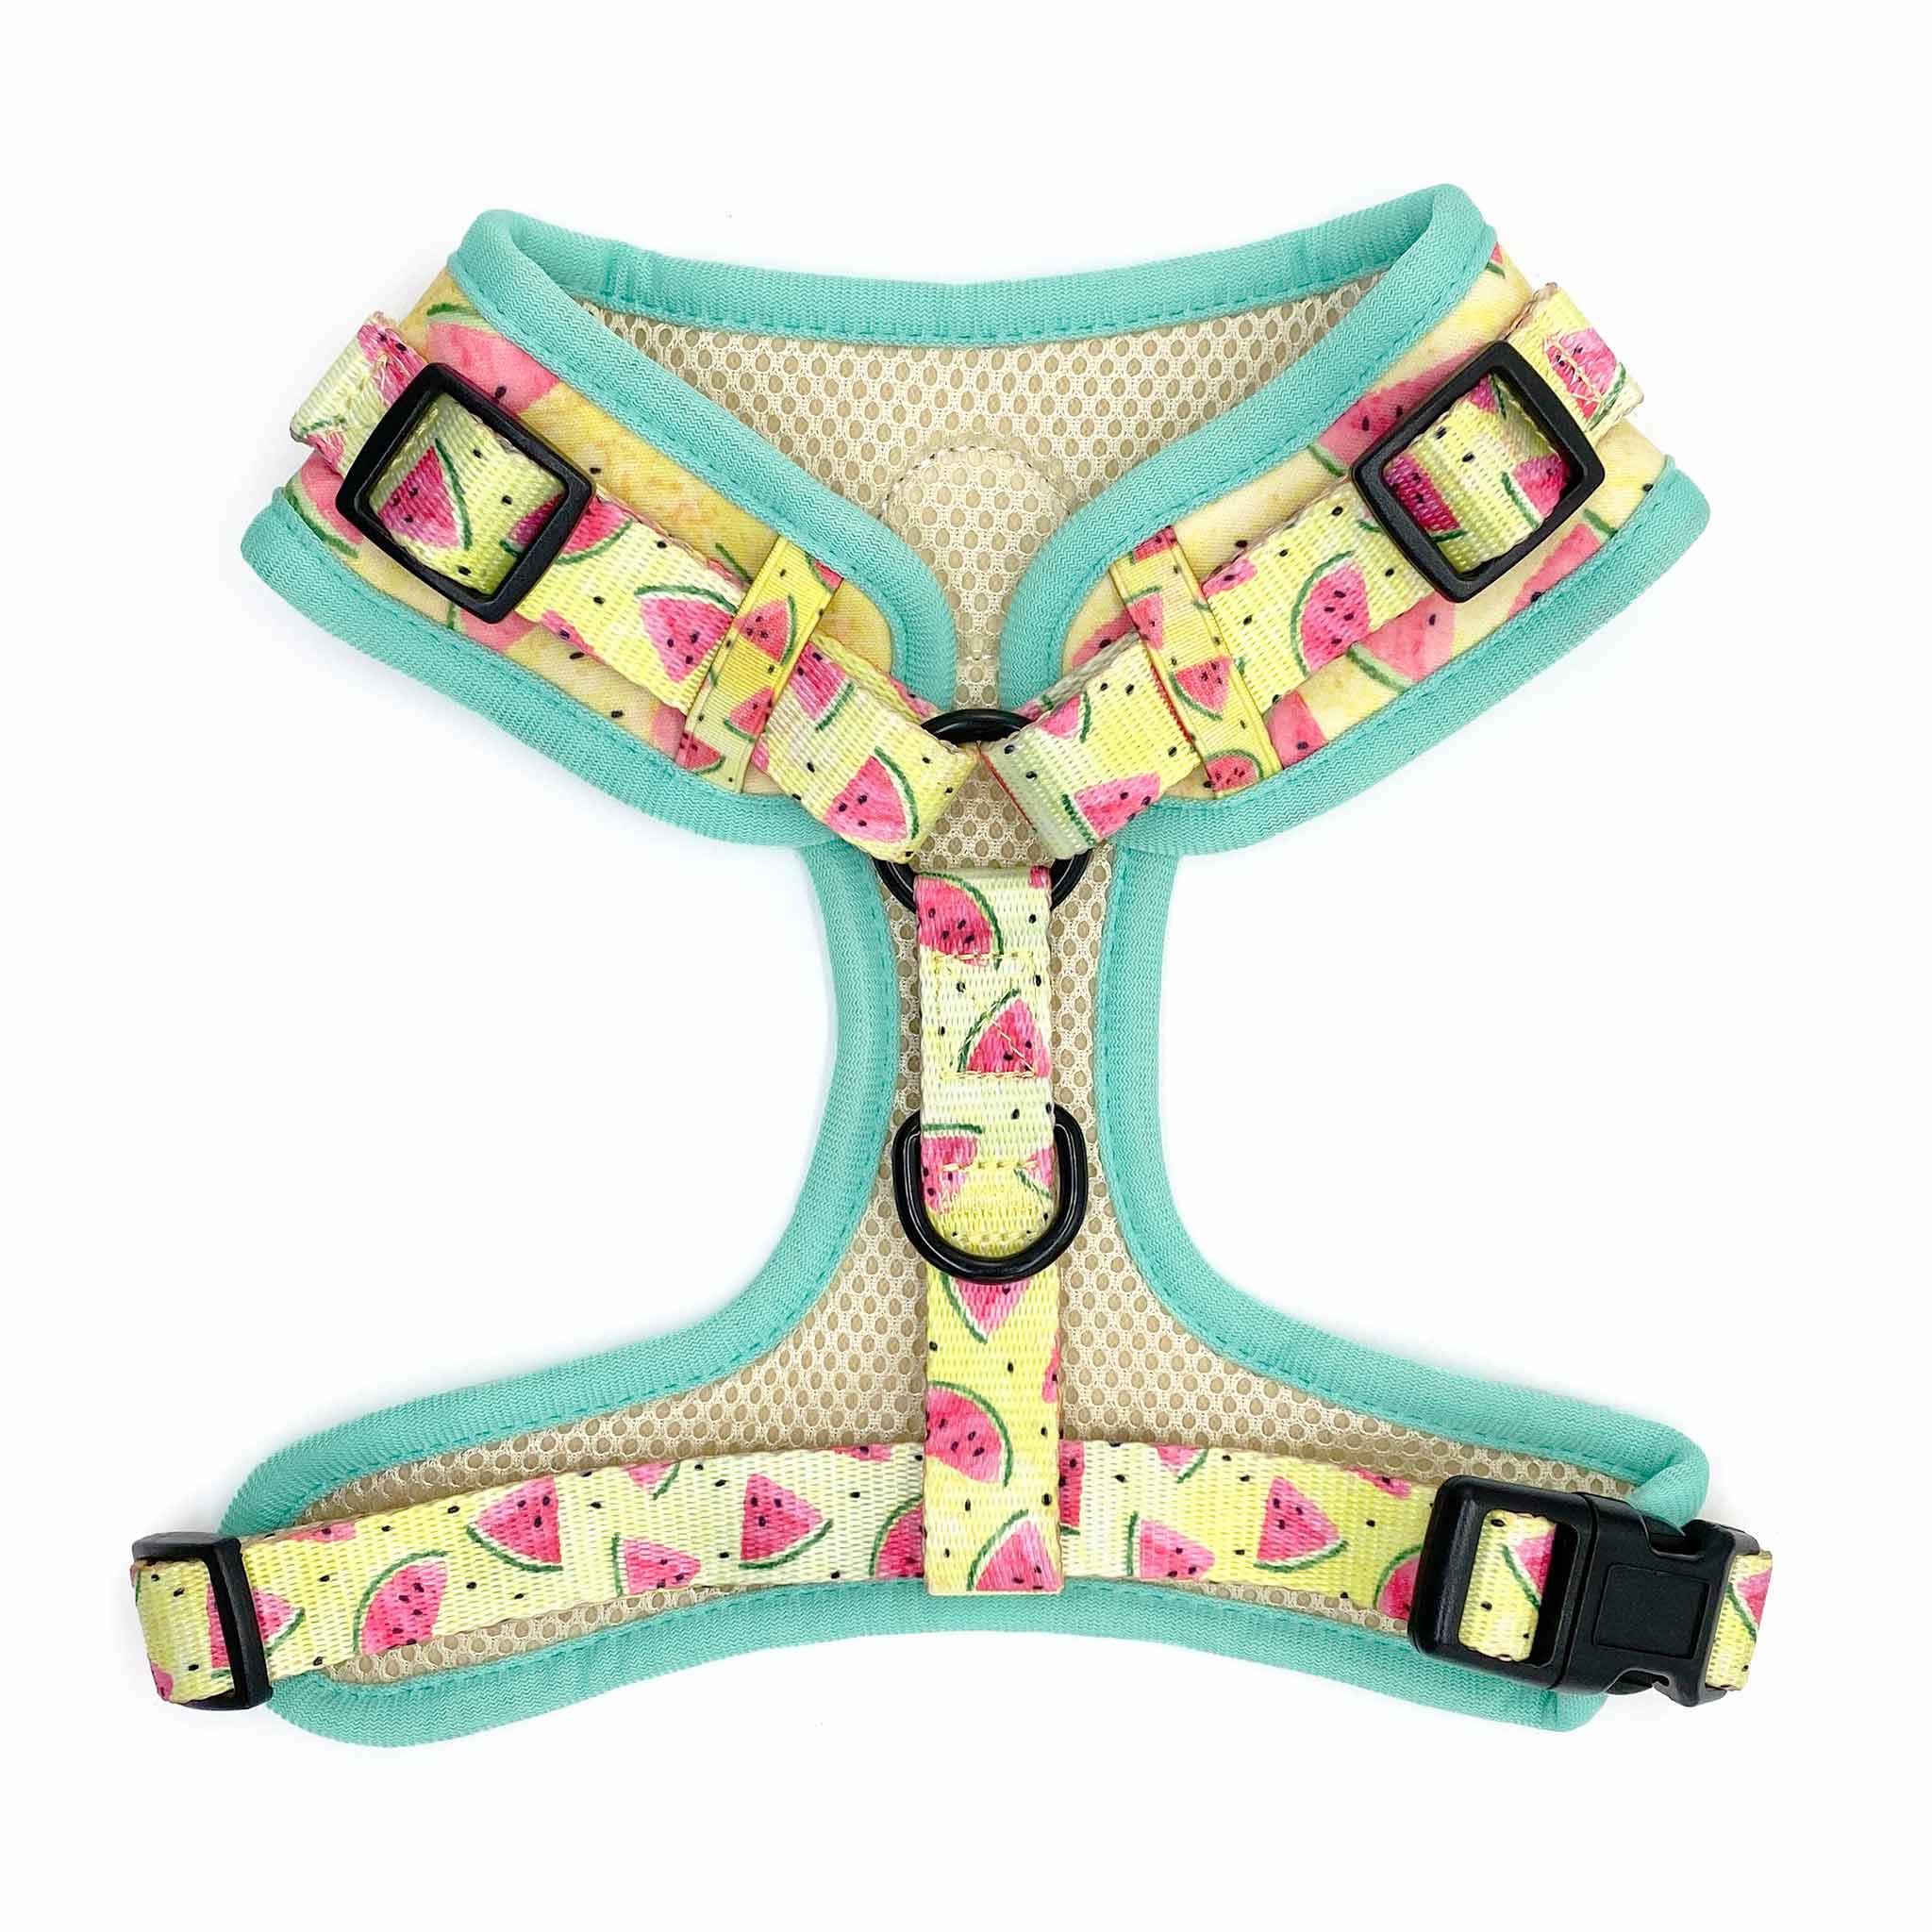 Back view of Pipco Pets adjustable dog harness with Summer Melons watermelon print pattern in yellow